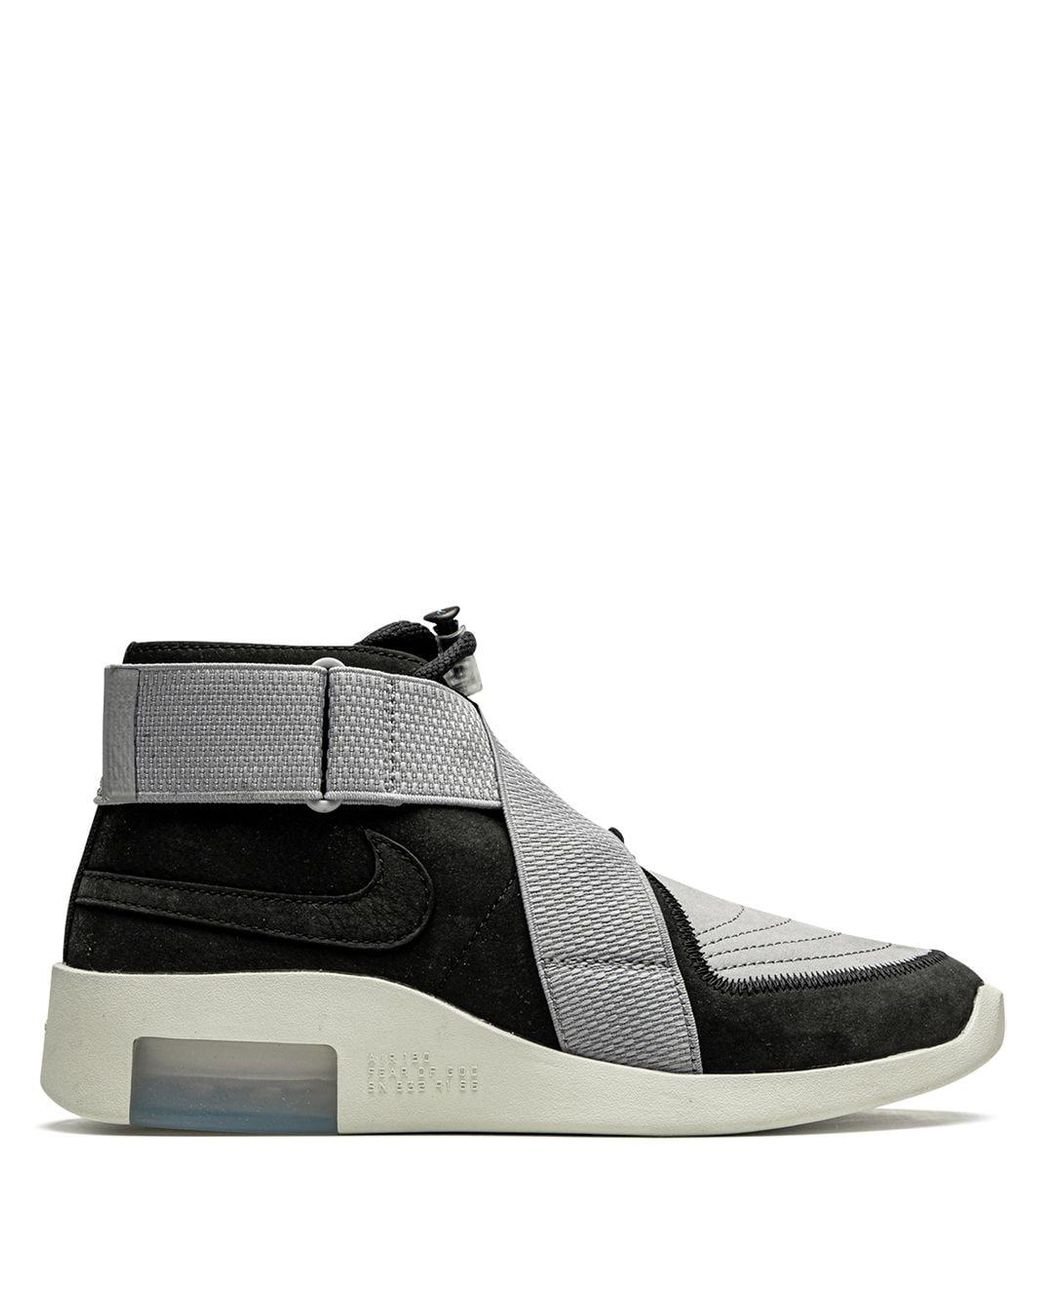 Nike Rubber Air Fear Of God Raid Sneakers in Black for Men - Lyst